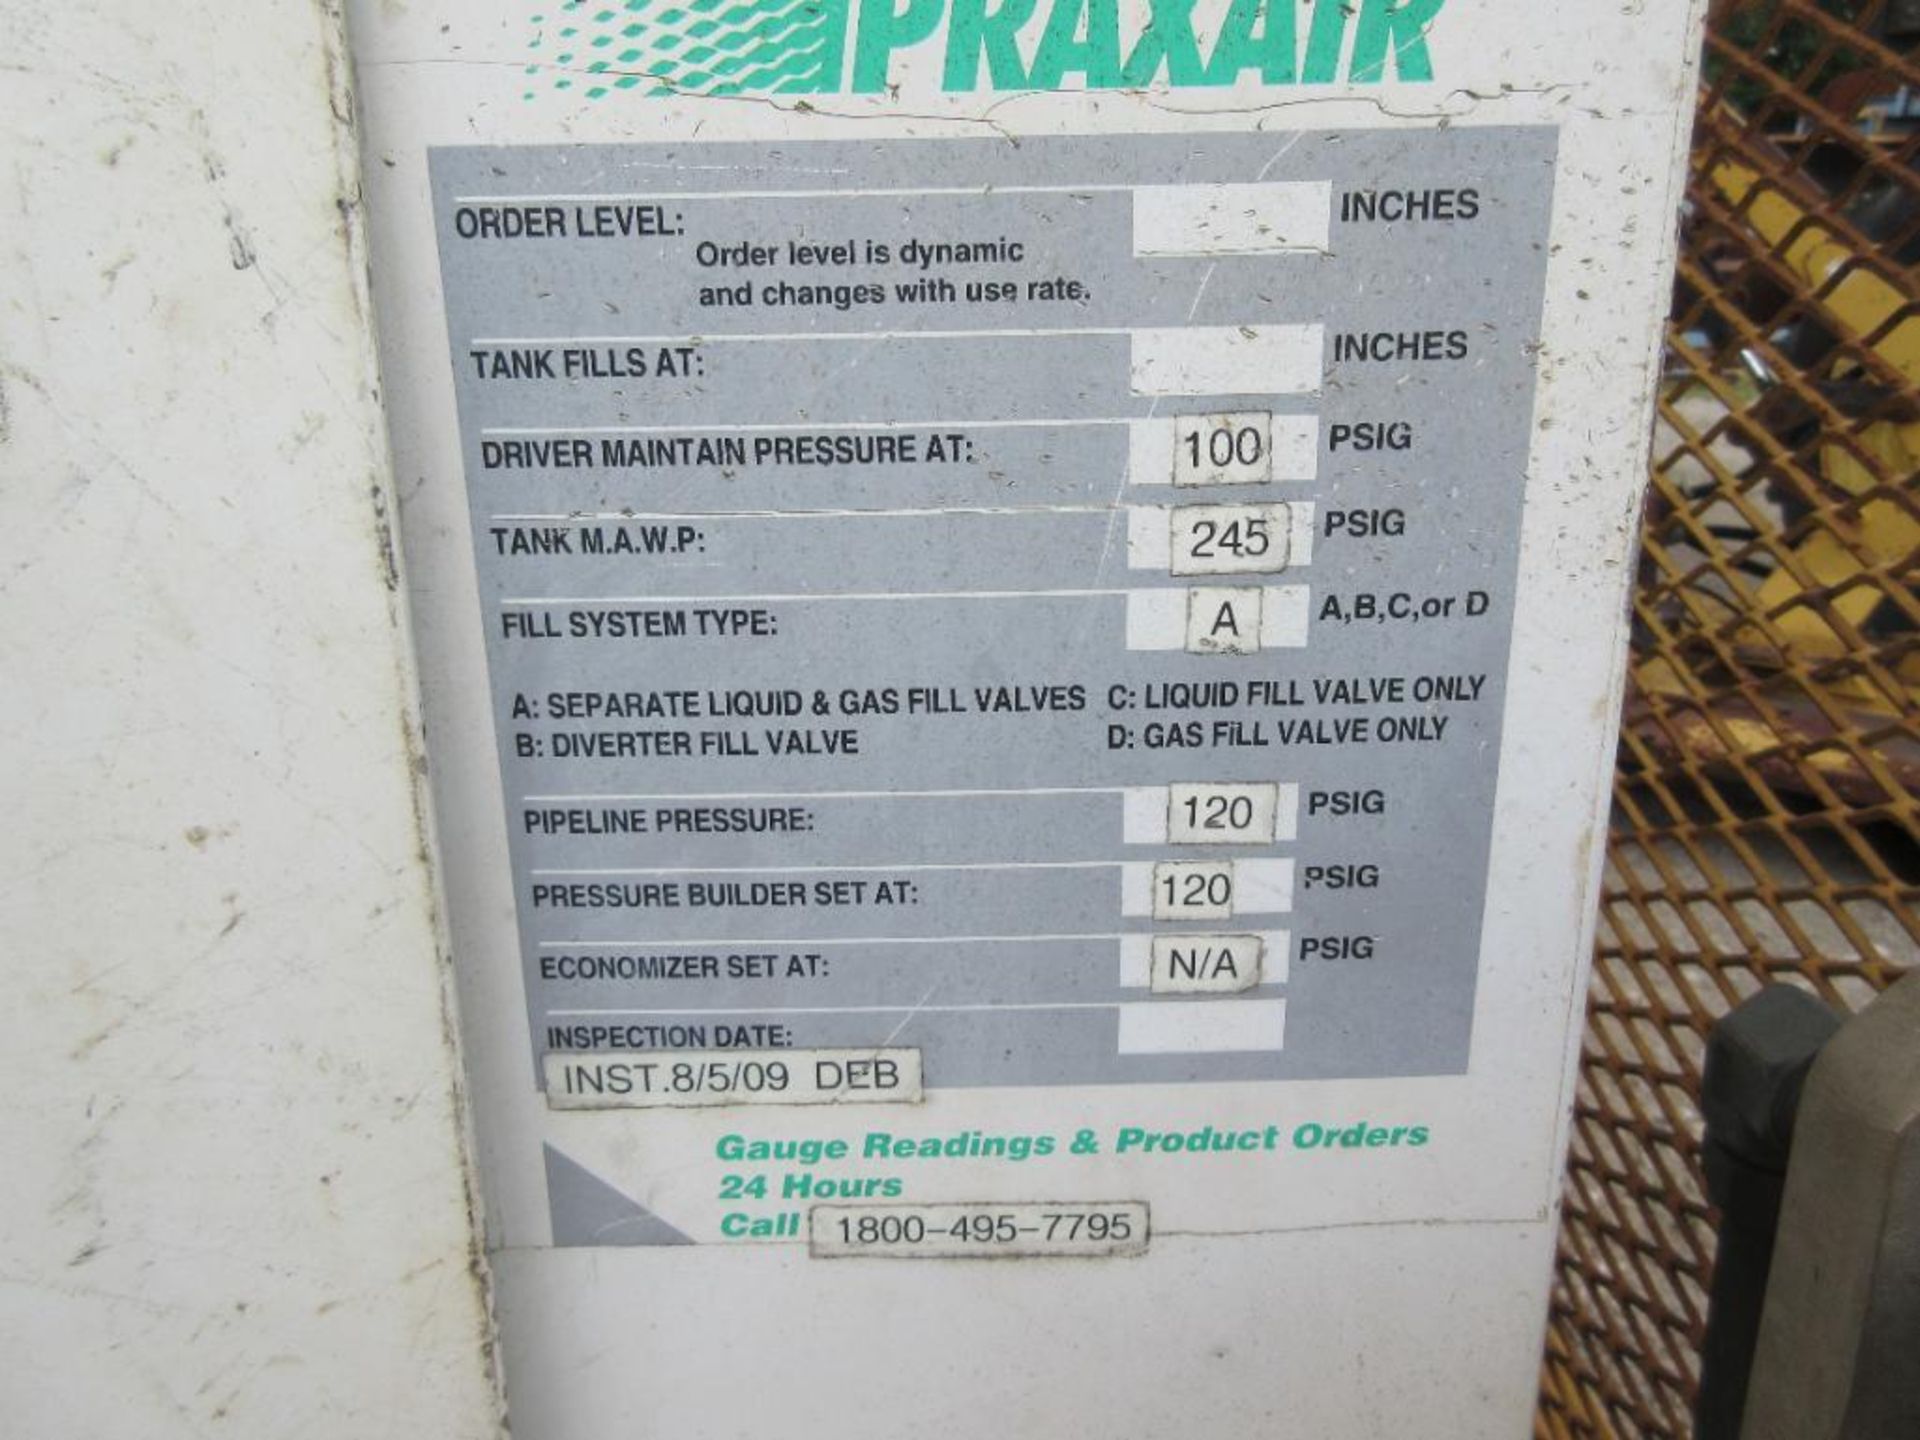 PRAXAIR LIQUID OXYGEN TO GAS REGENERATOR MOUNTED OF PORTABLE STEEL SLED CAGE, 120 PSIG, A FILL - Image 4 of 8